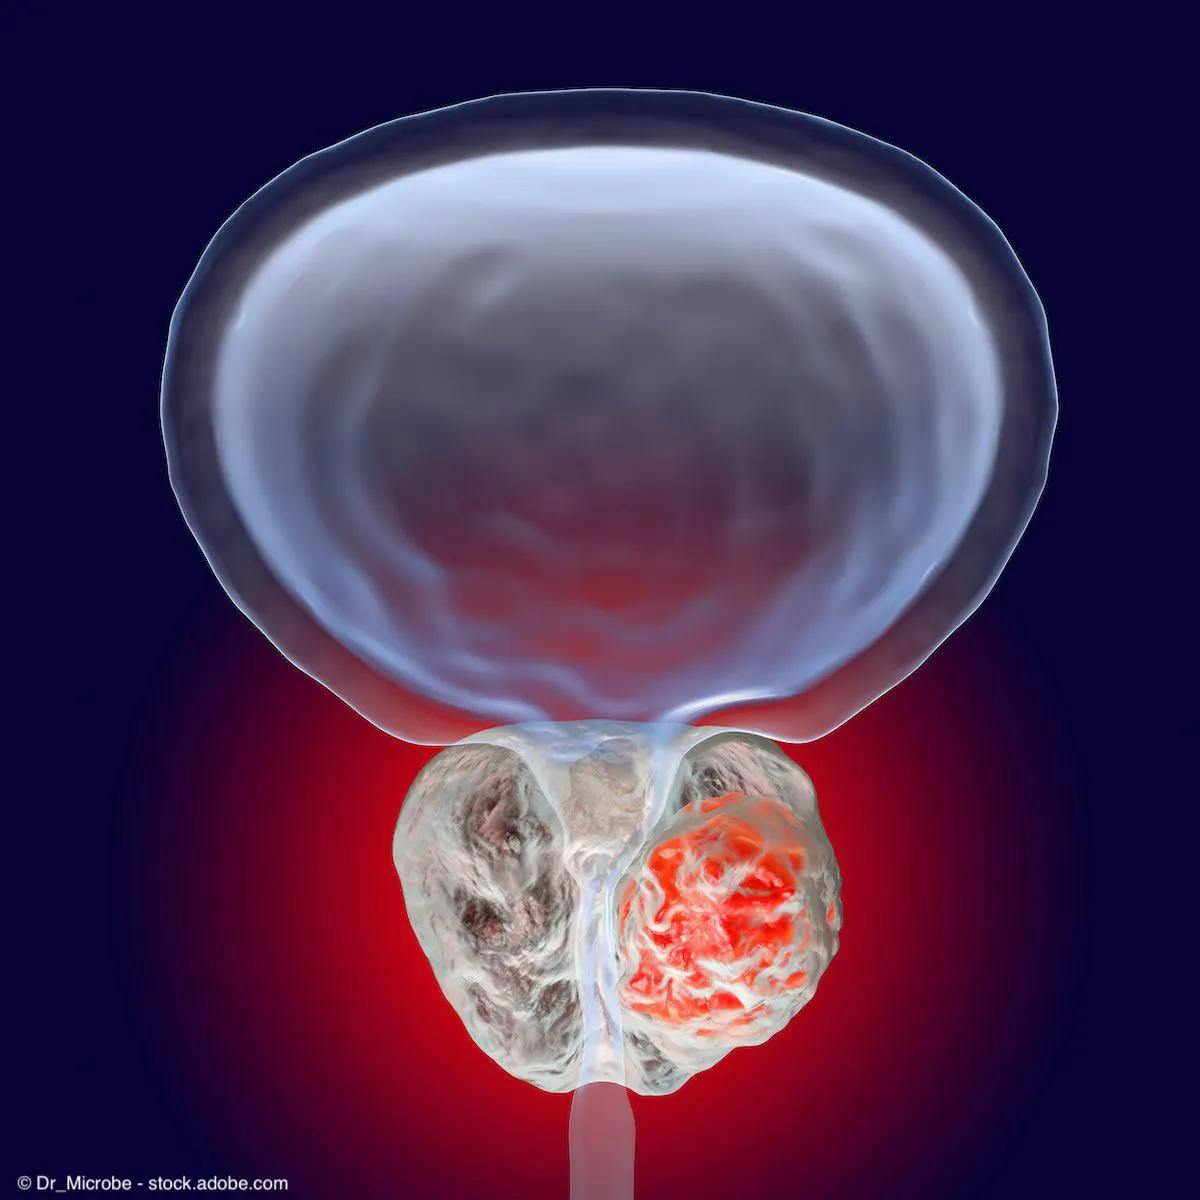 Relugolix plus radiotherapy shows safety, efficacy in prostate cancer 